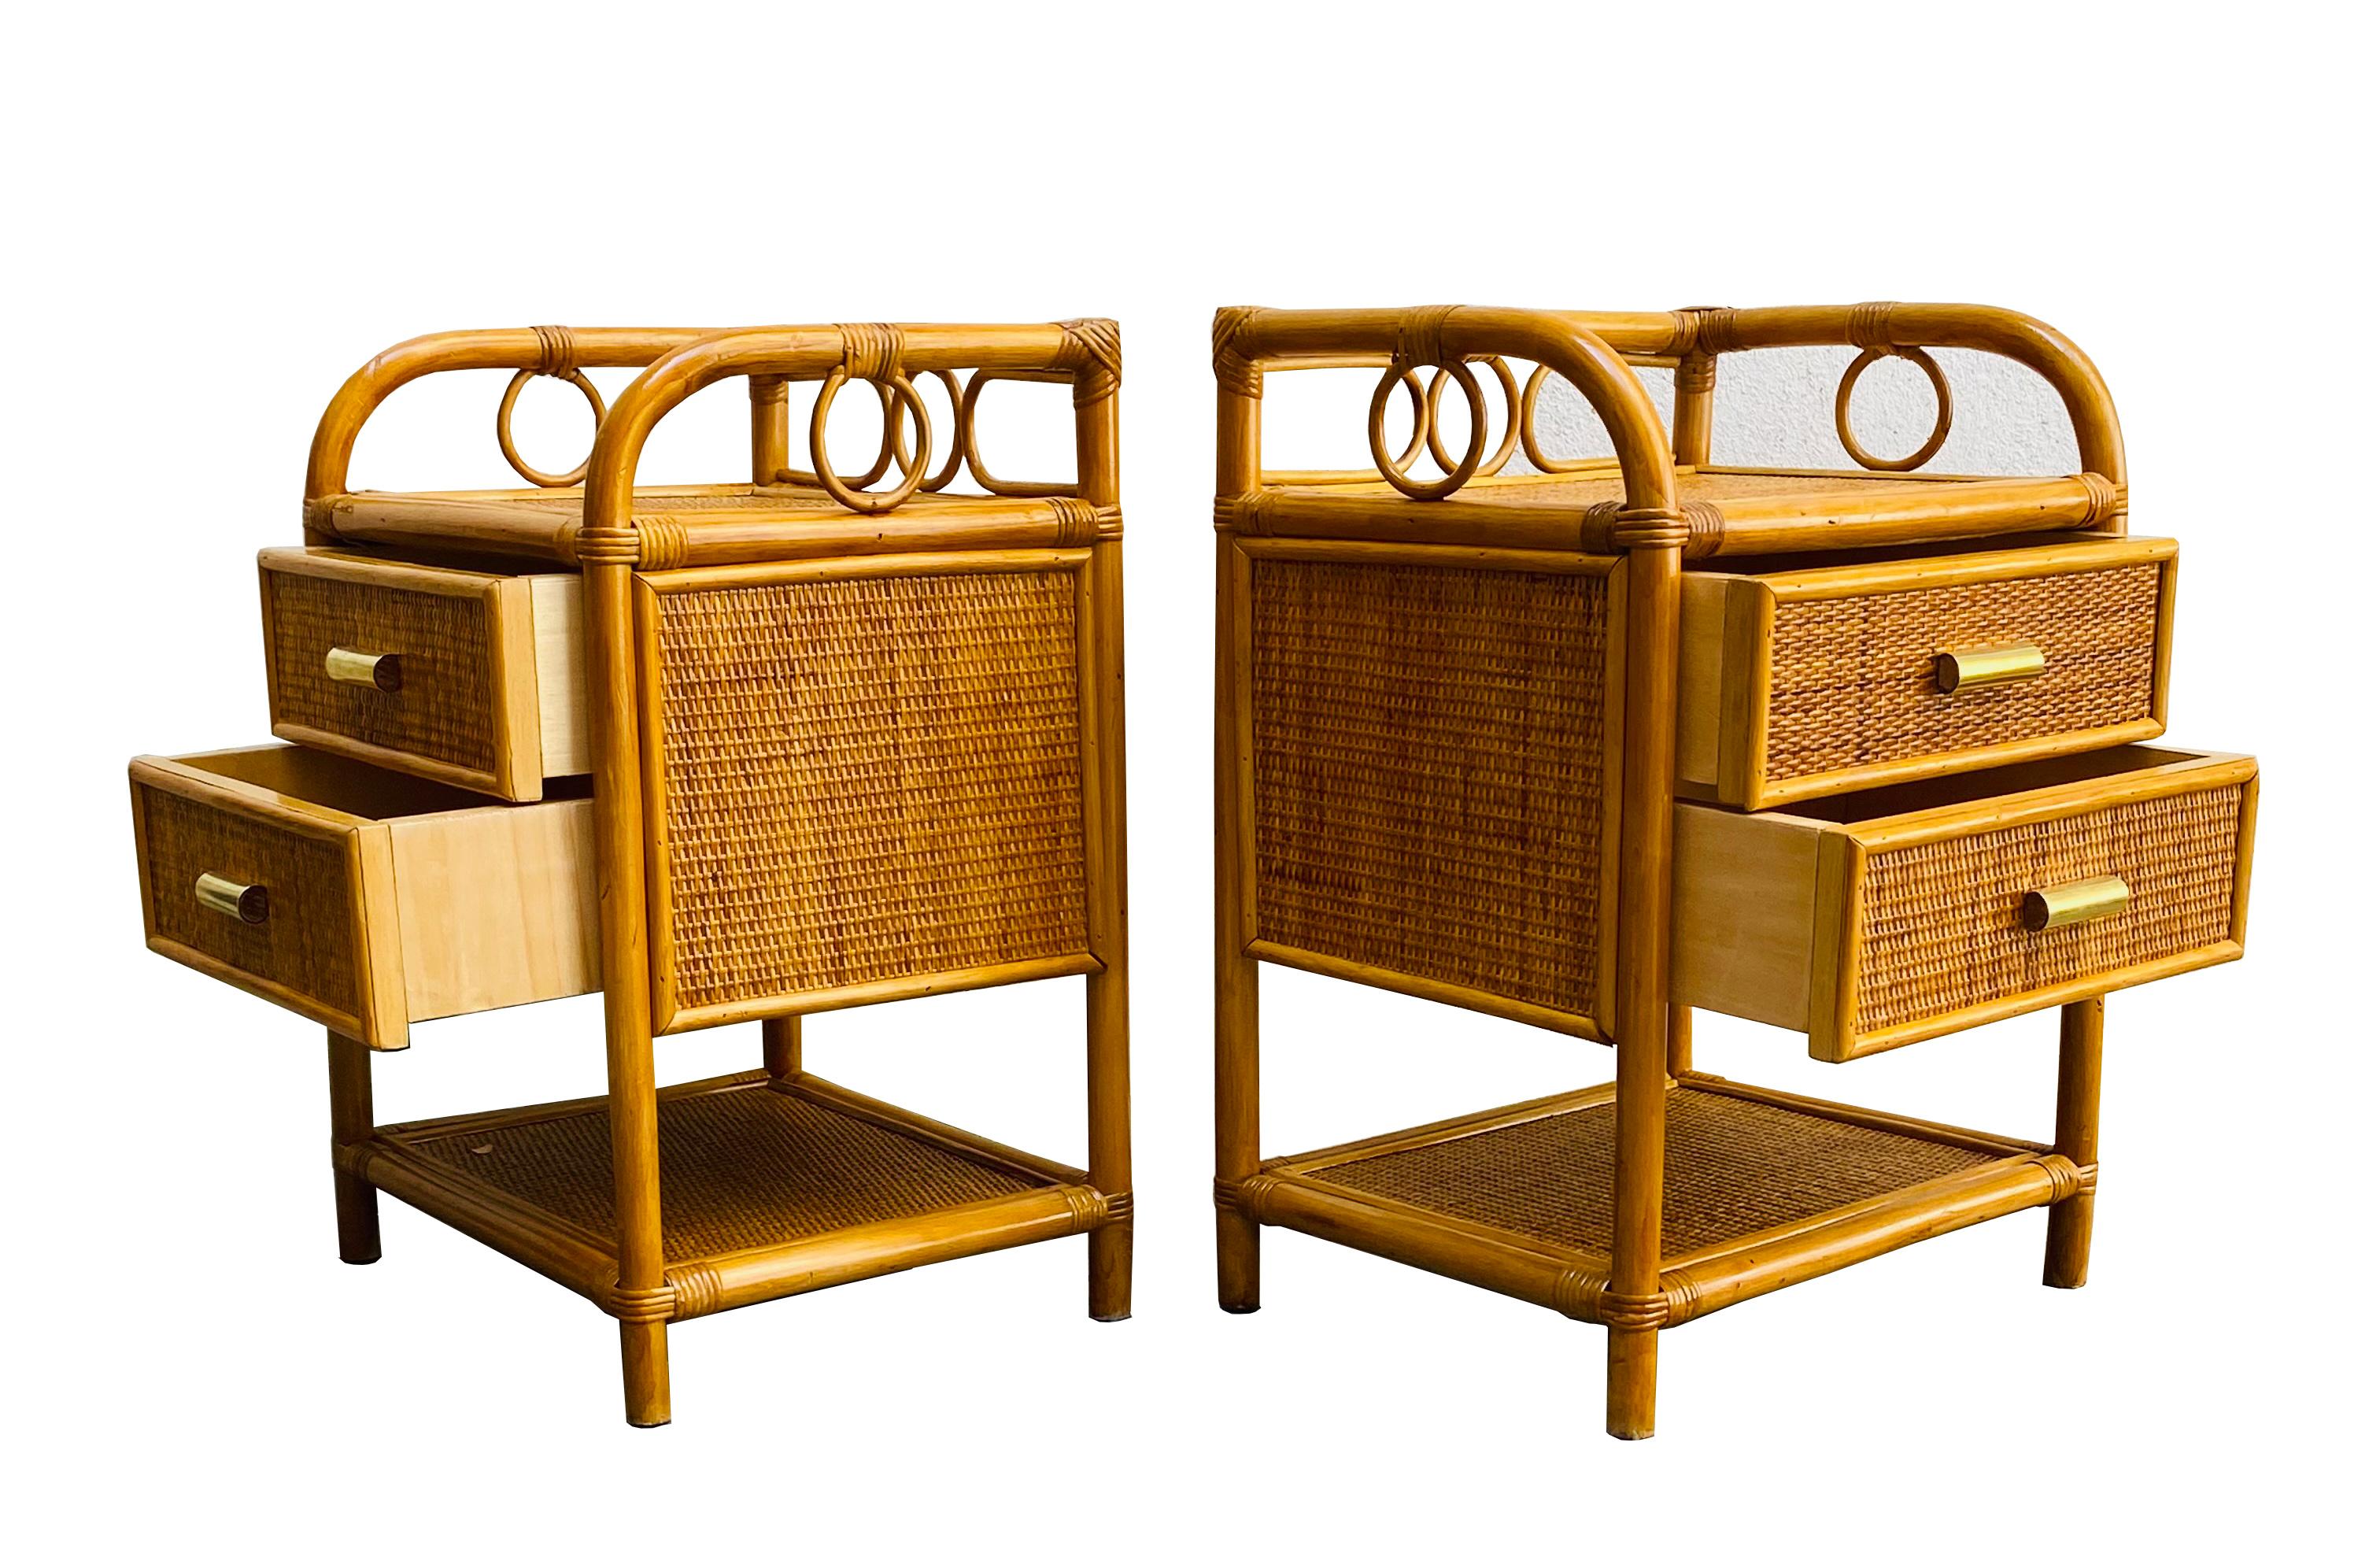 Pair of Italian bamboo cane and rattan bedside tables designed in the 1970s. The main features of this wonderful set are the beautiful straight rationalist lines, enhanced by the use of natural materials, such as bamboo for the frame, rattan for the